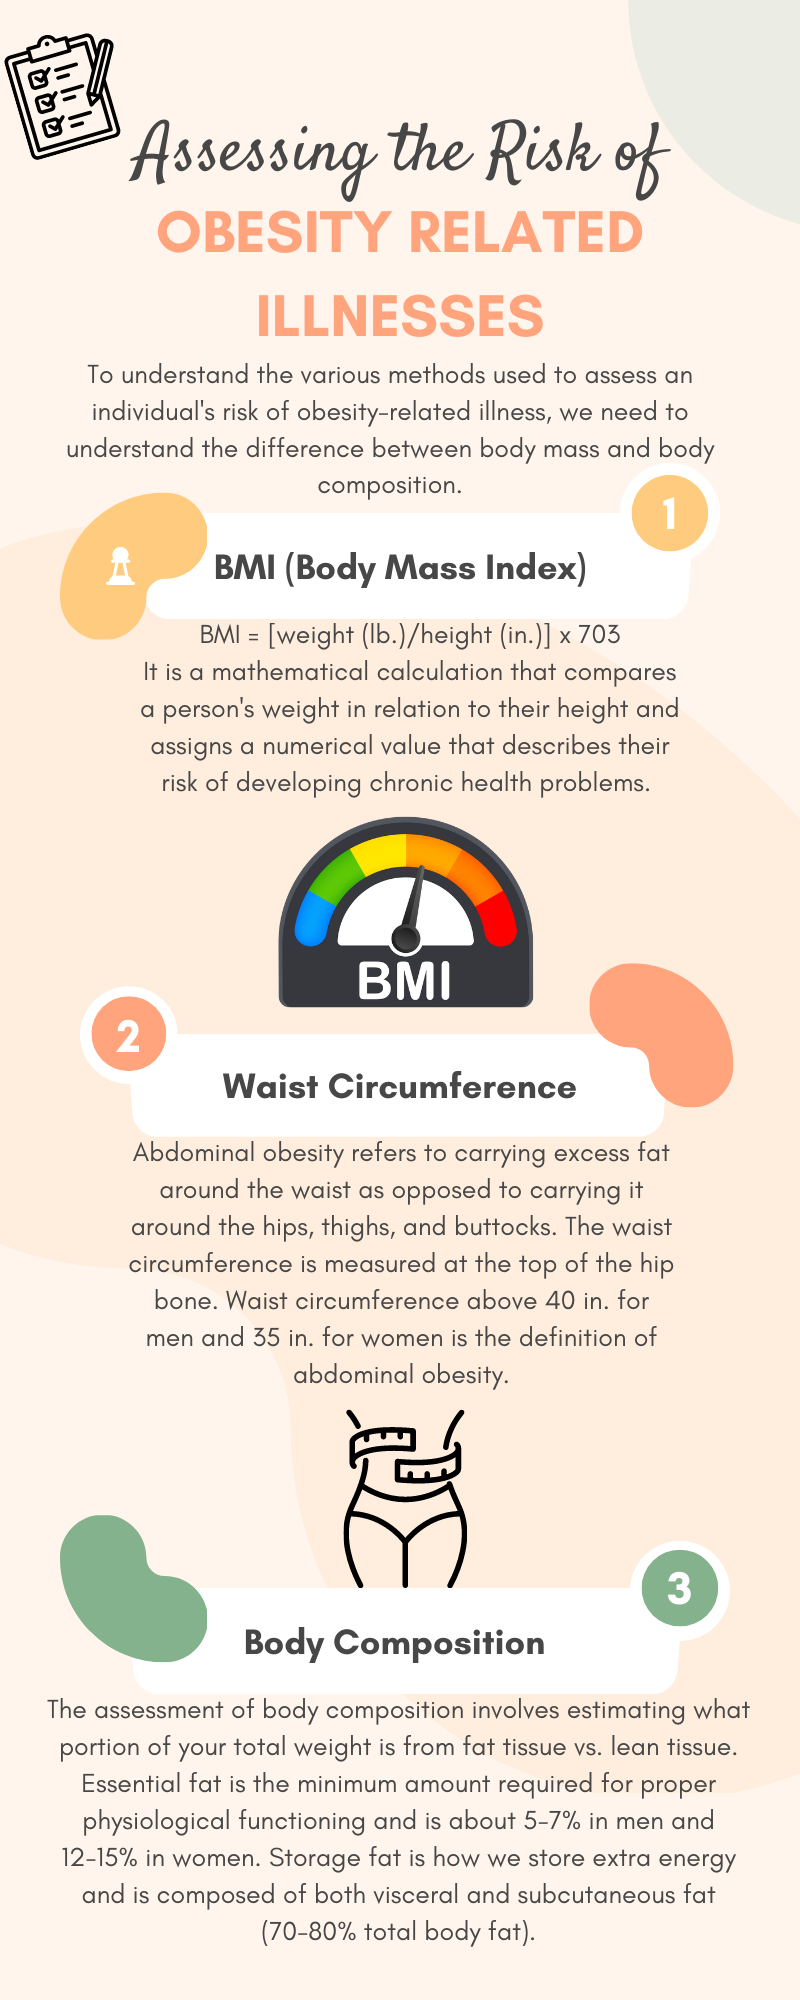 Infographic showing three ways that obesity related illness can be assessed: BMI, waist circumference, and body composition